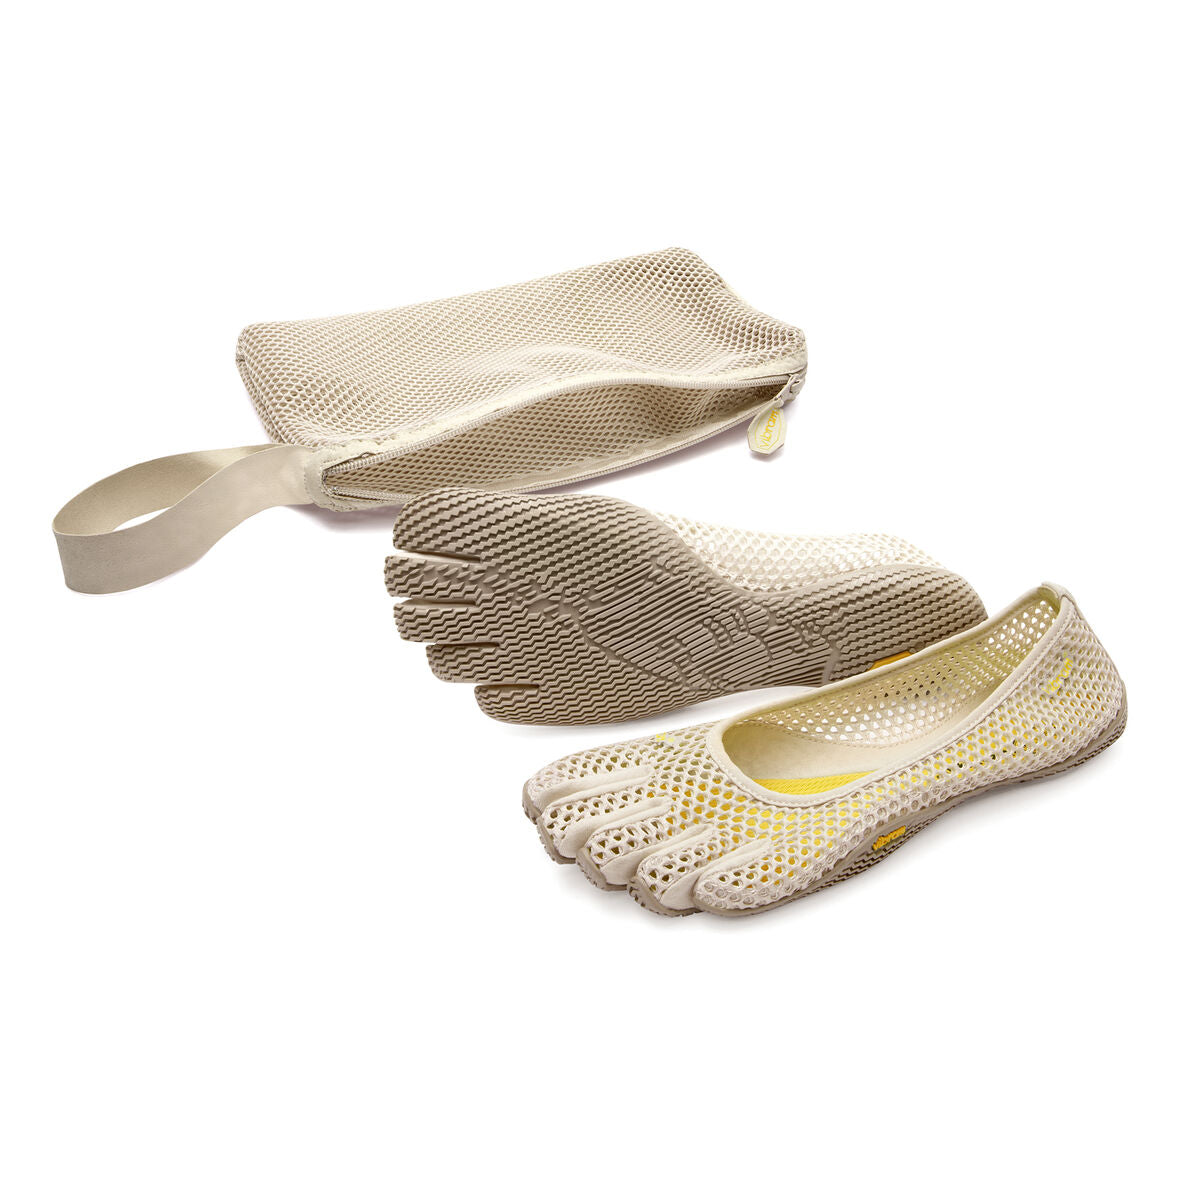 Women's Vibram Five Fingers Vi-B Training Shoe in White Cap from the front